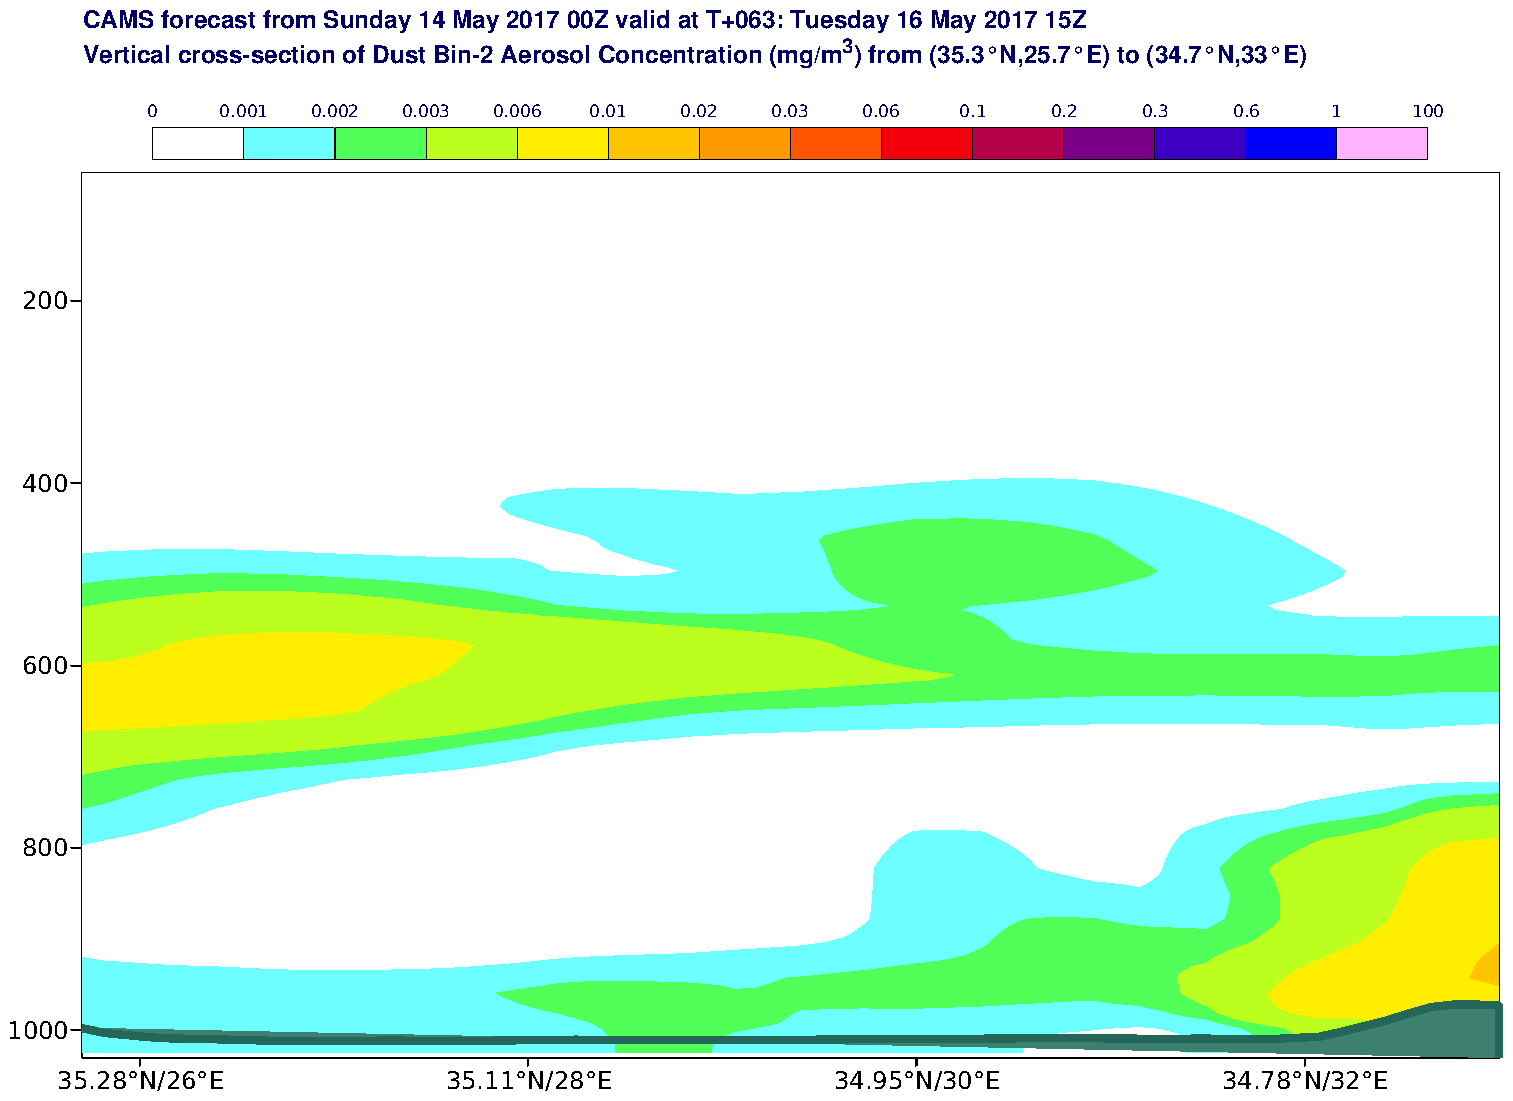 Vertical cross-section of Dust Bin-2 Aerosol Concentration (mg/m3) valid at T63 - 2017-05-16 15:00